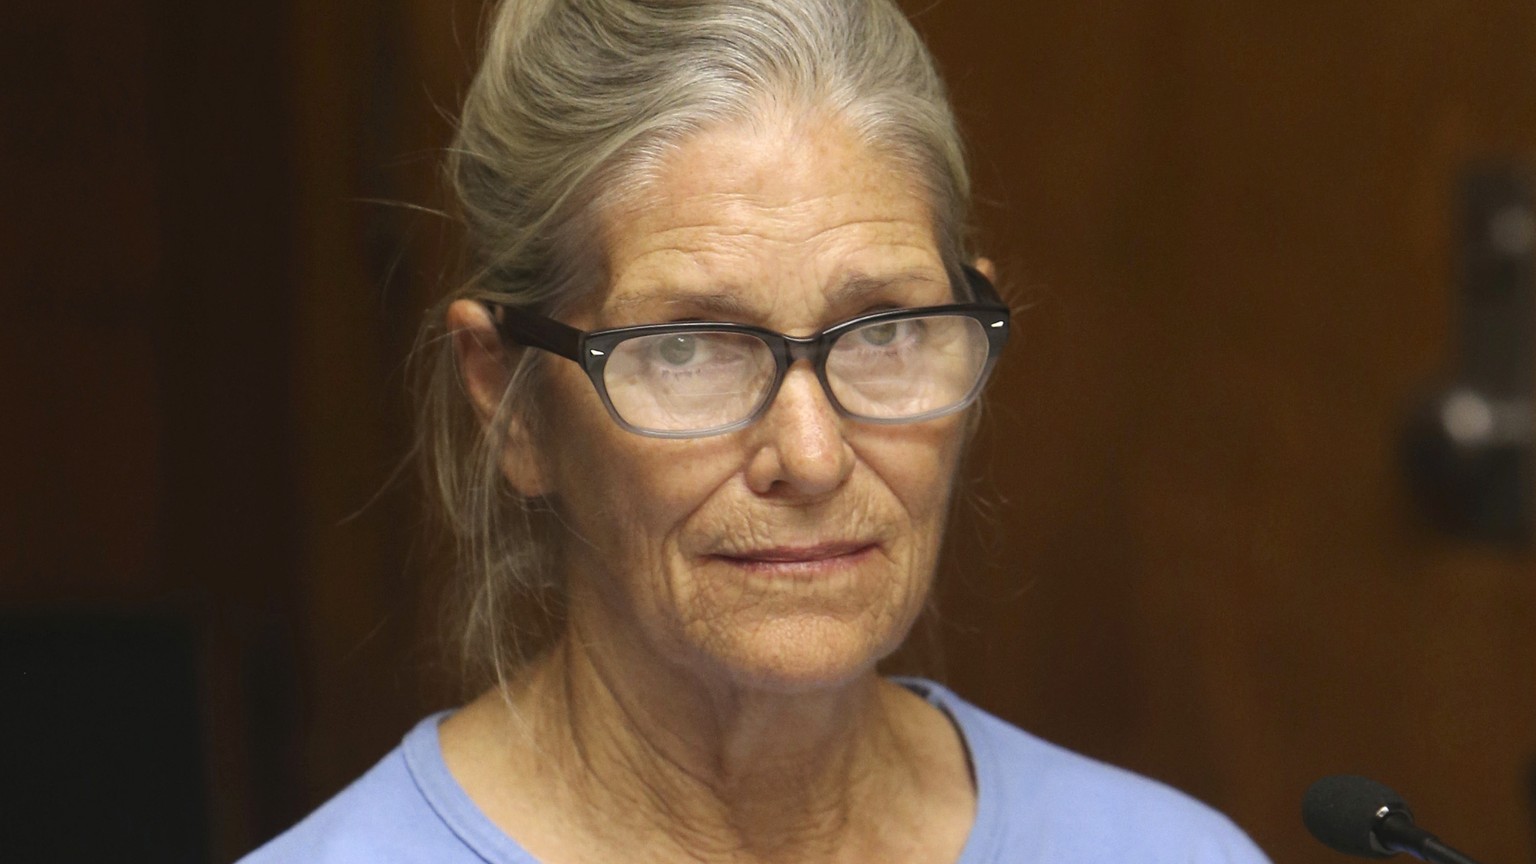 FILE - Leslie Van Houten attends her parole hearing at the California Institution for Women Sept. 6, 2017 in Corona, Calif. A California appeals court says Charles Manson follower Van Houten should be ...